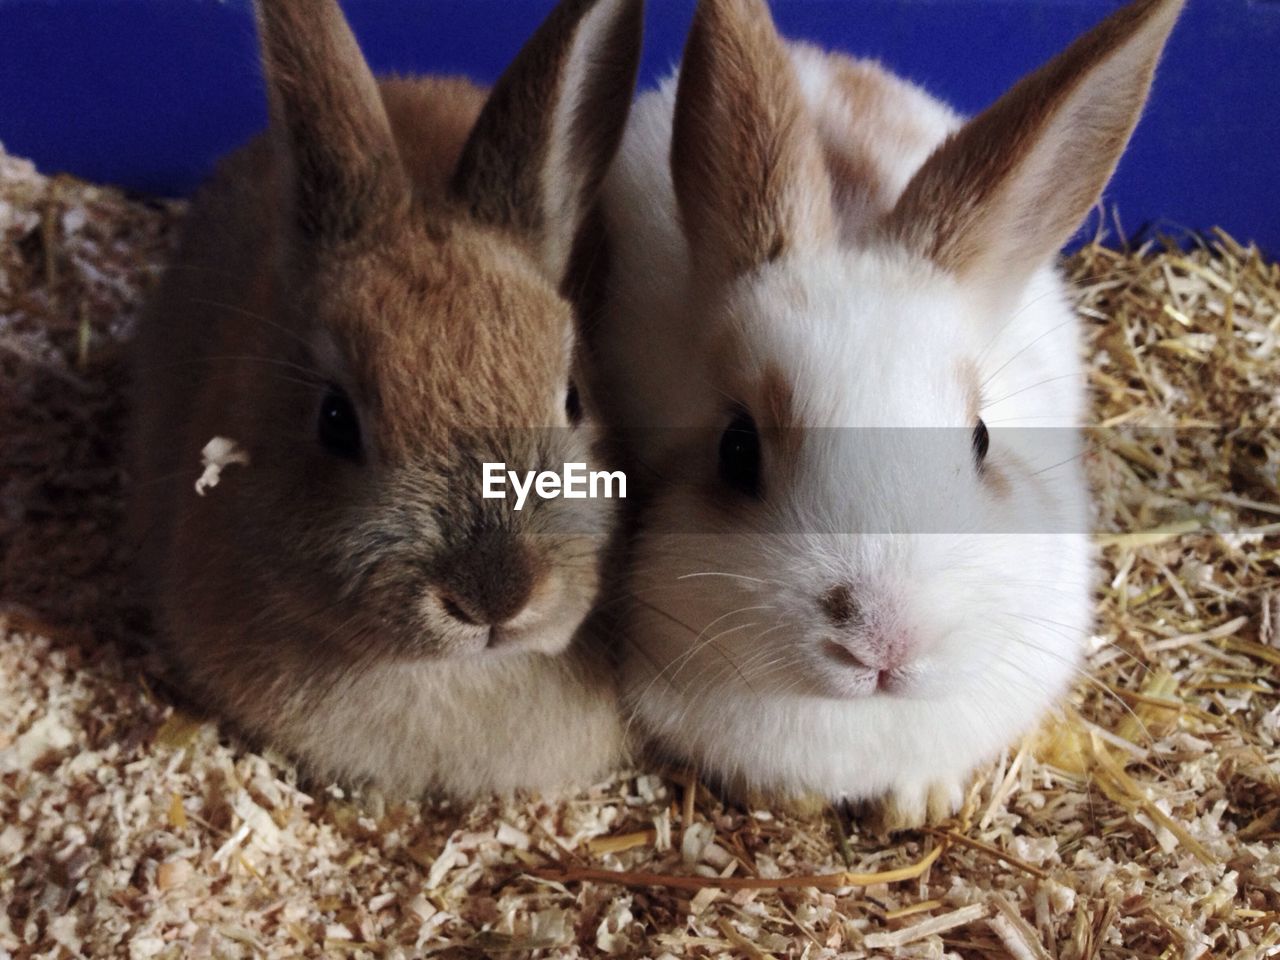 Close-up portrait of two rabbits